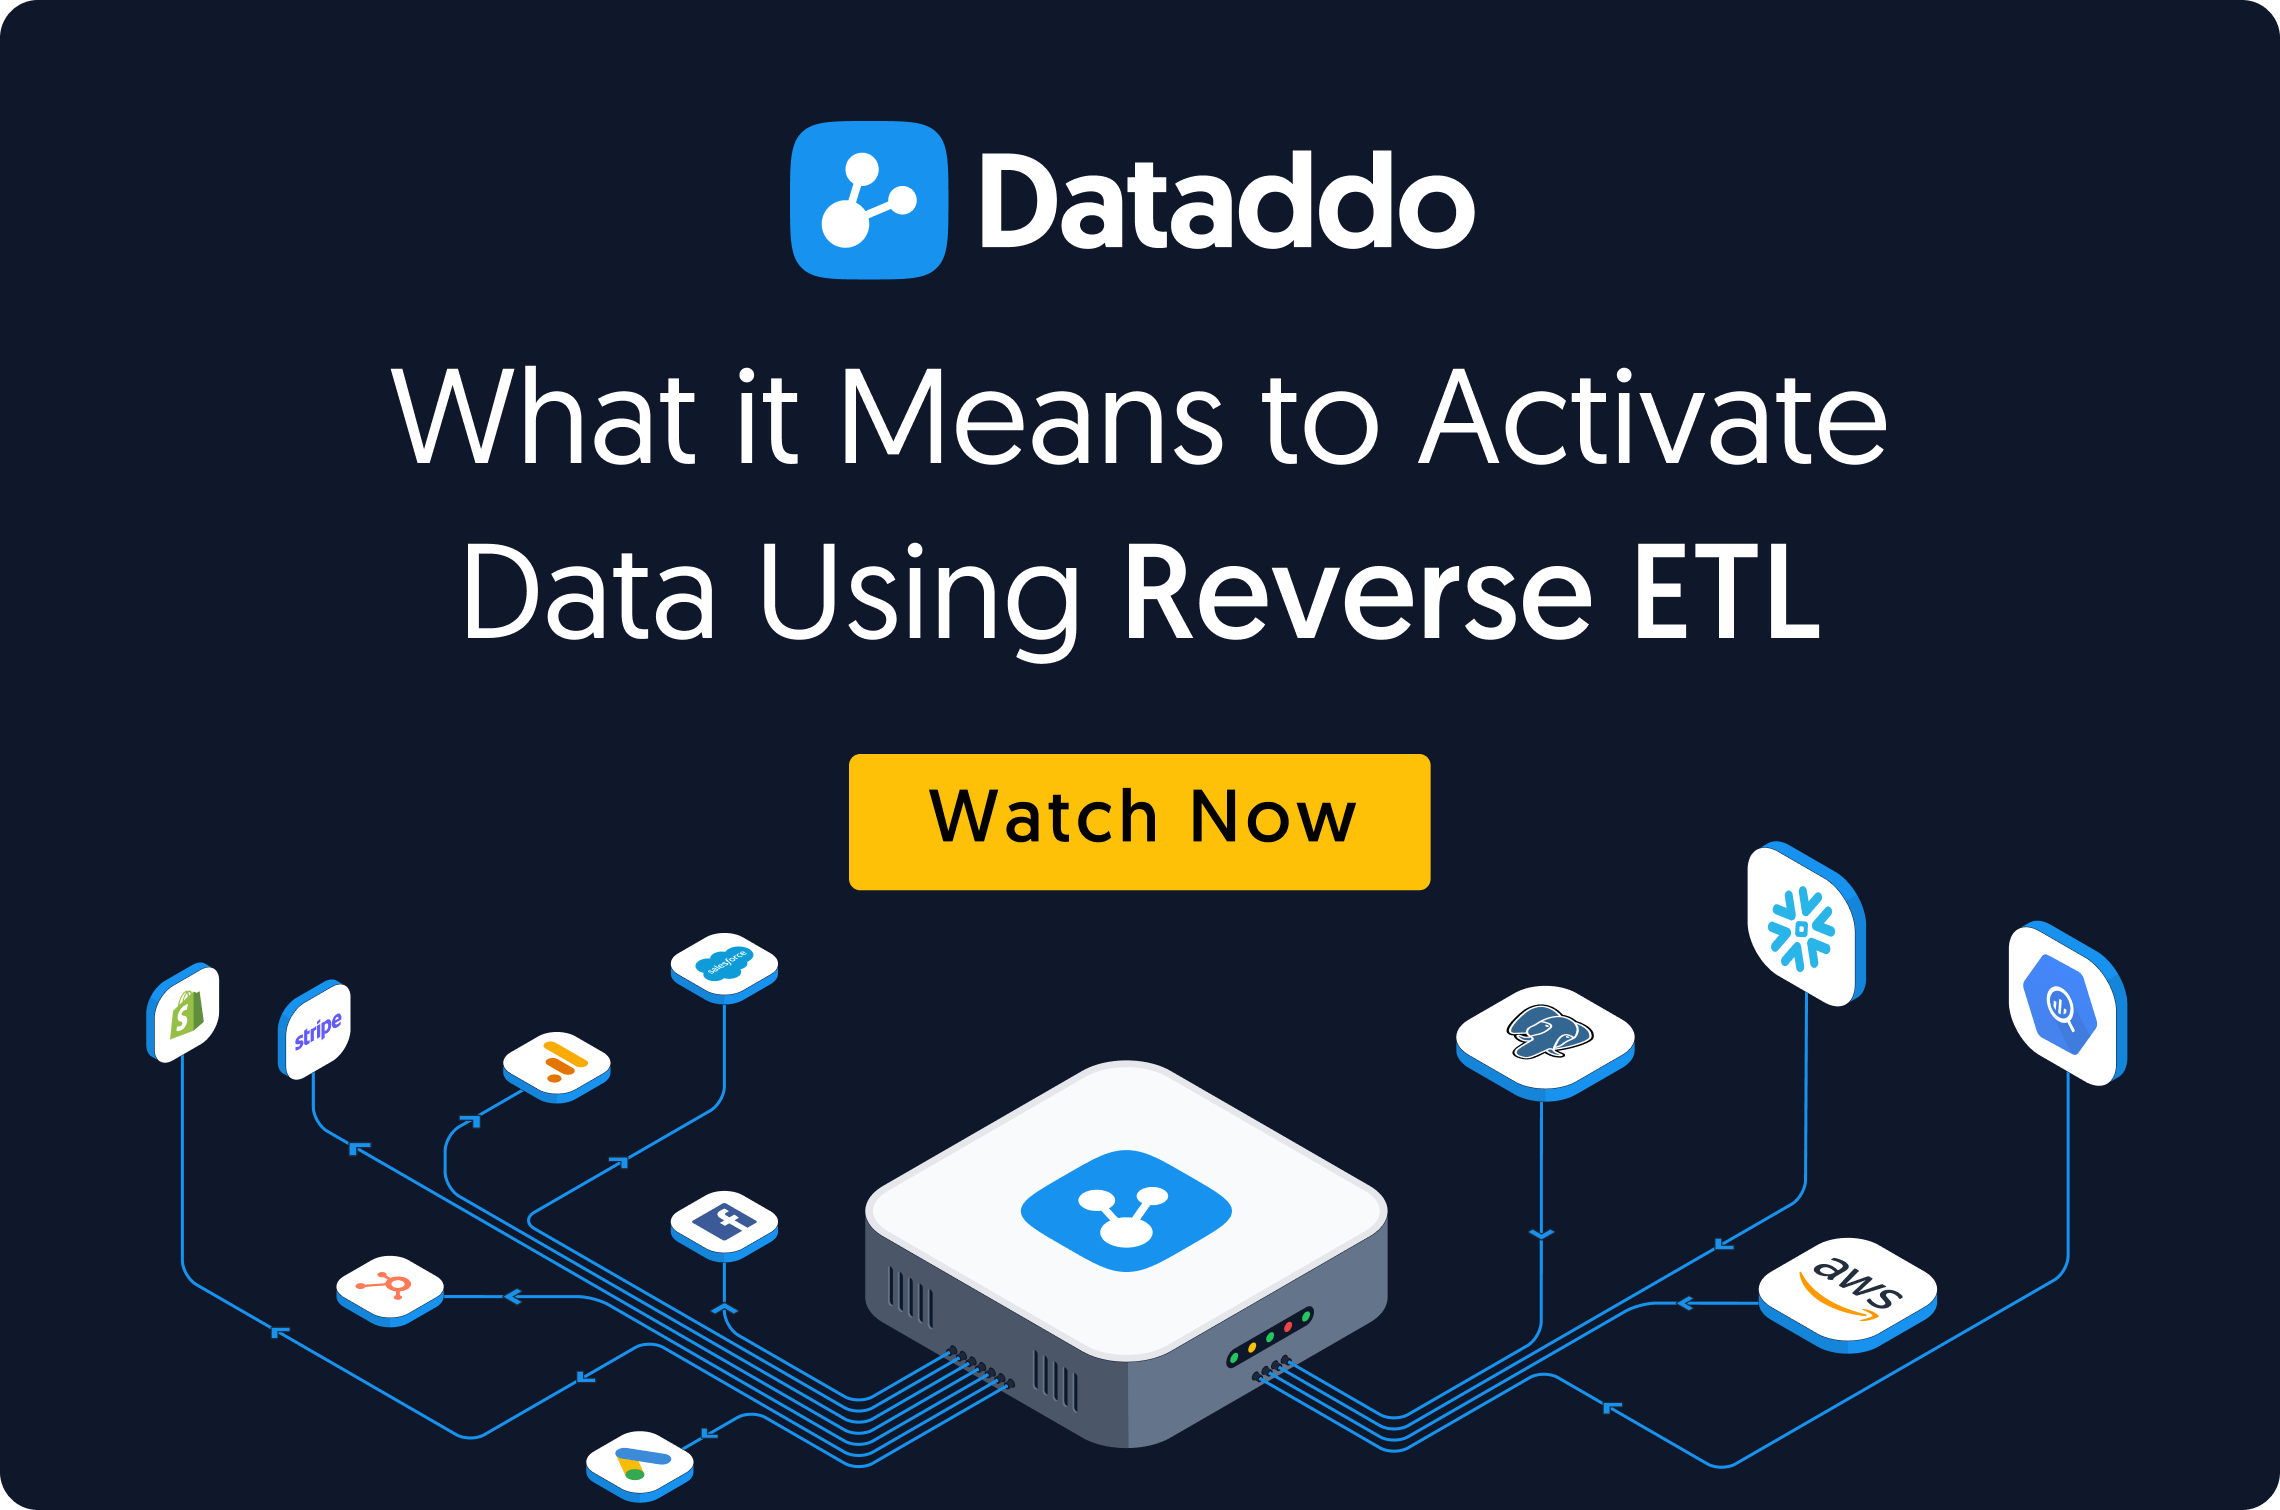 [VIDEO] What it Means to Activate Data Using Reverse ETL